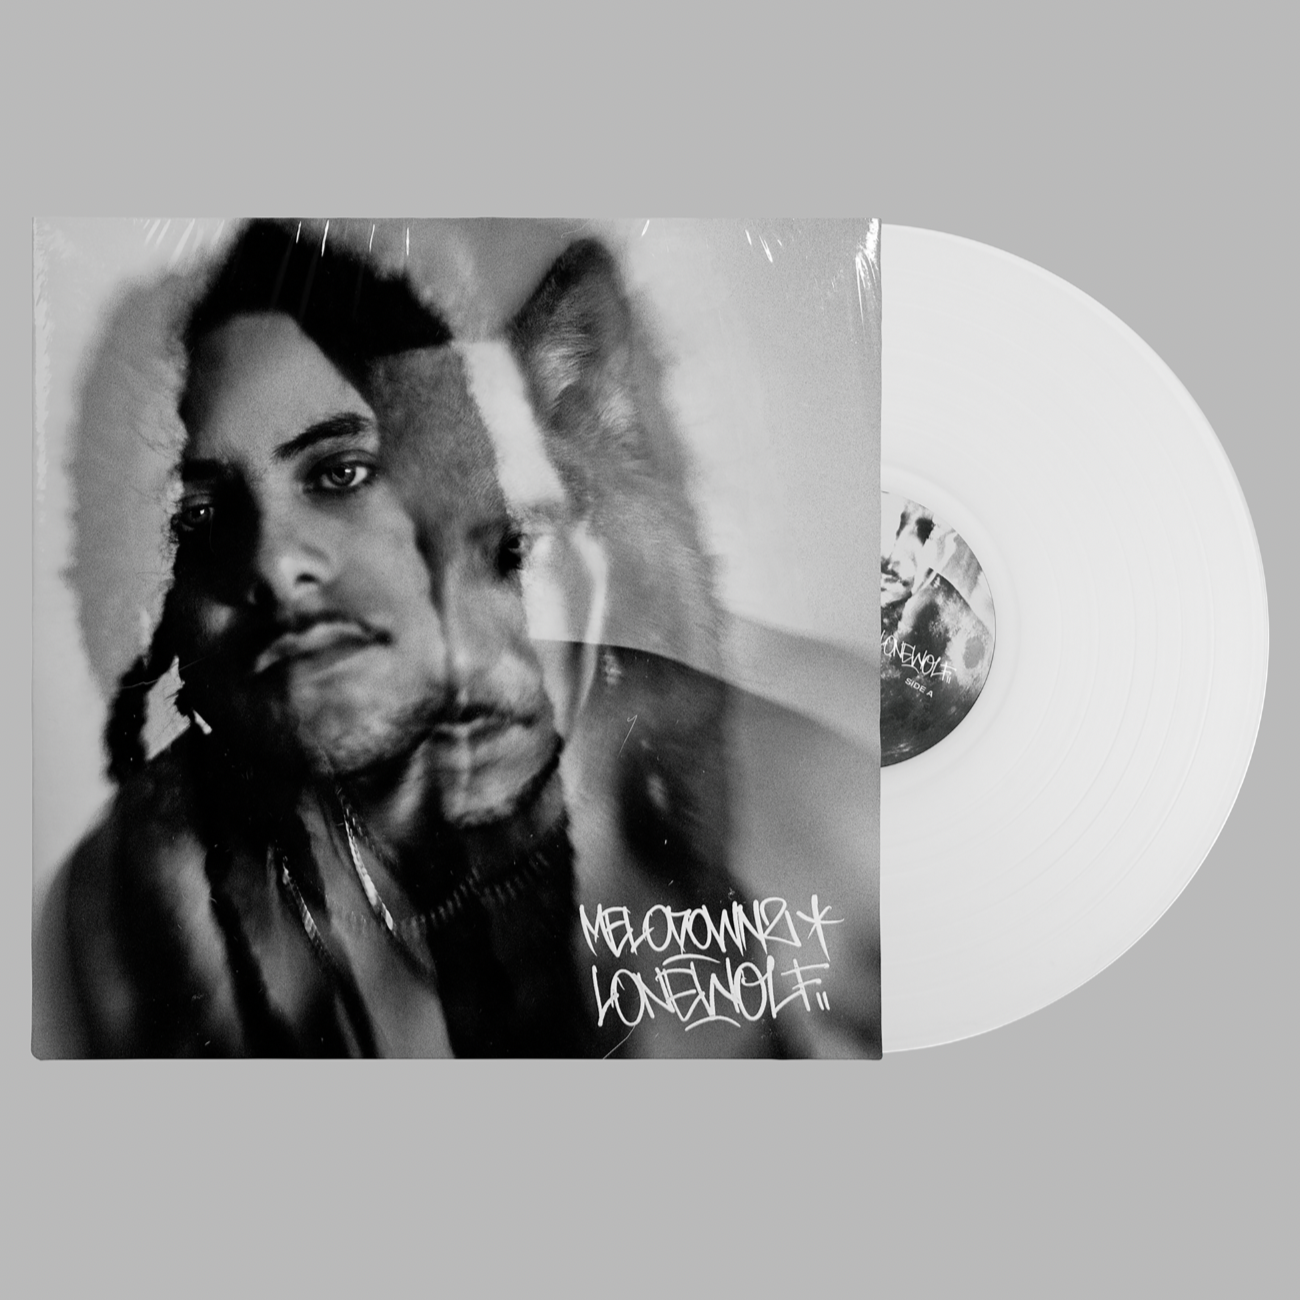 Limited Edition Signed "Lone Wolf" White Vinyl